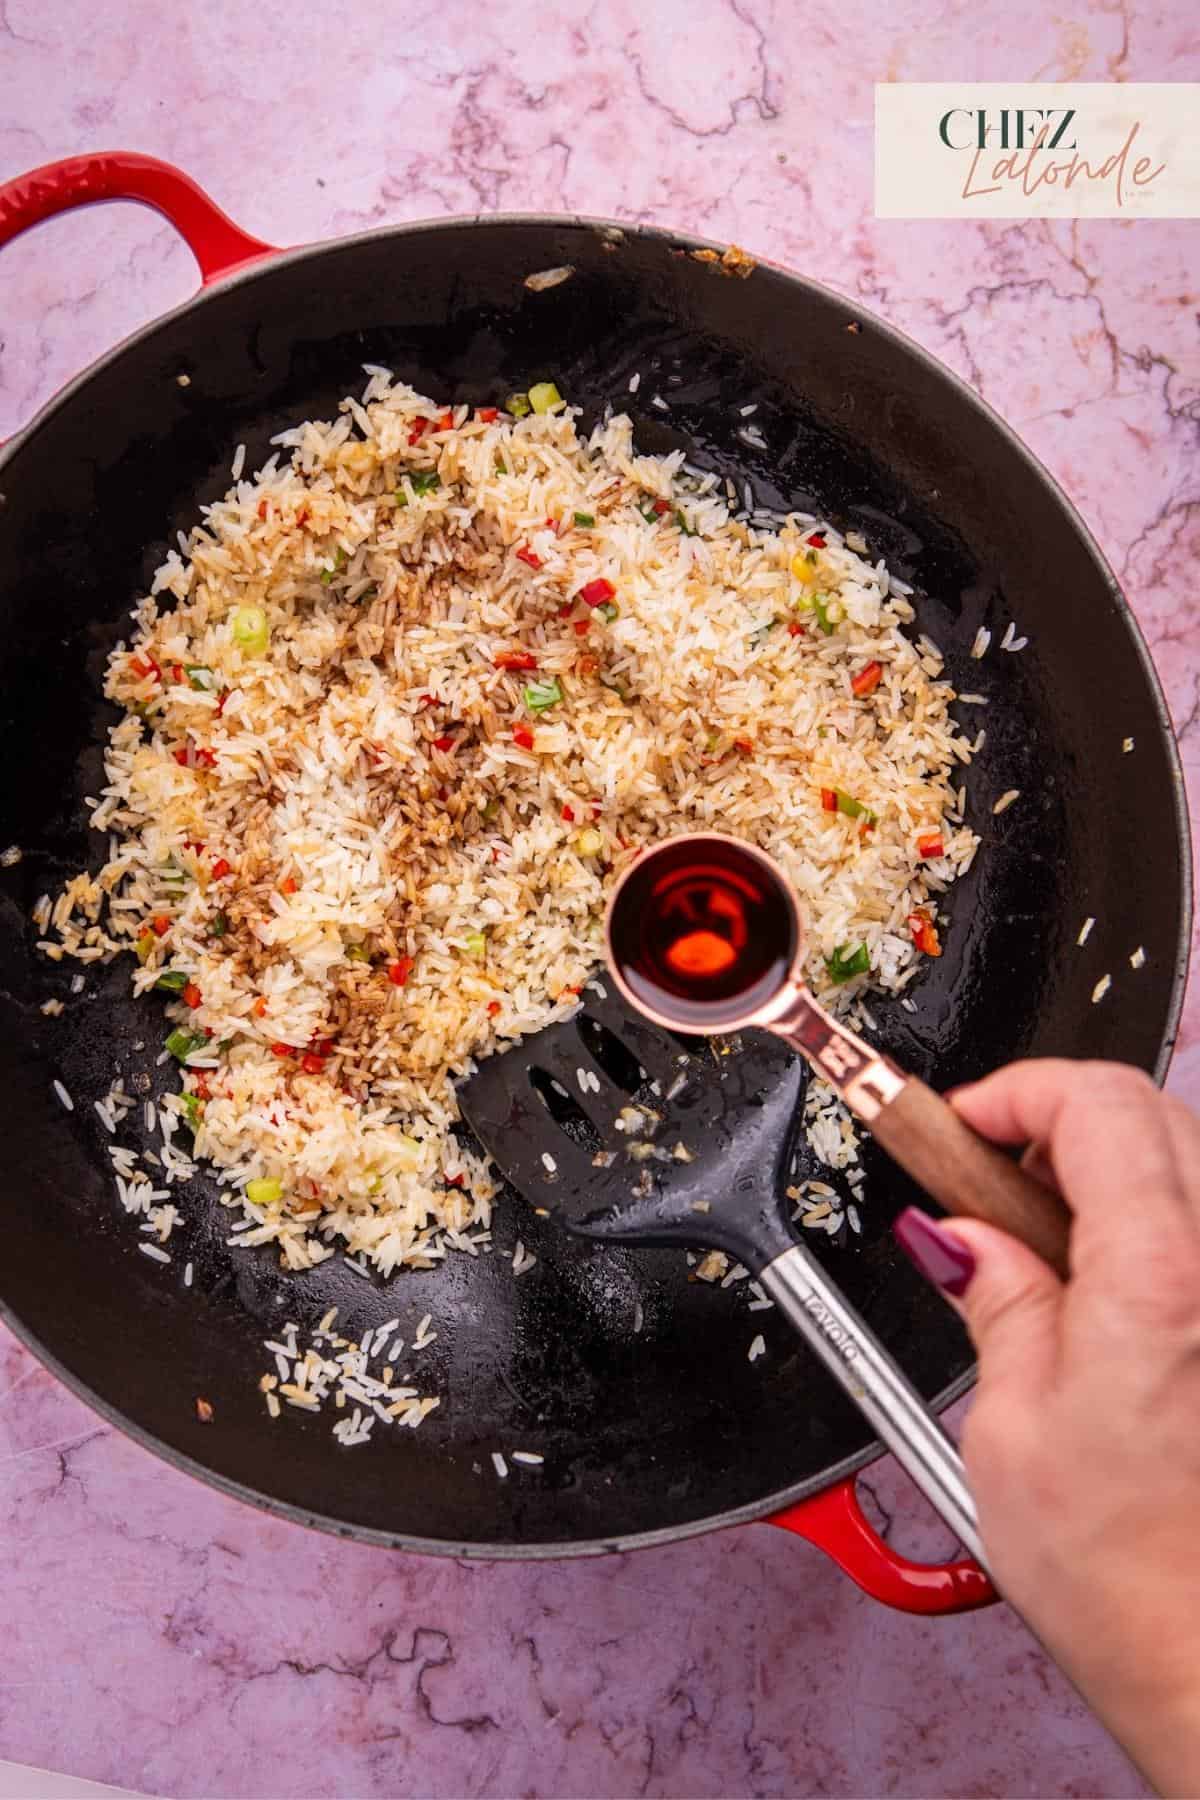 Add 2 tablespoons of sesame oil to fried rice.